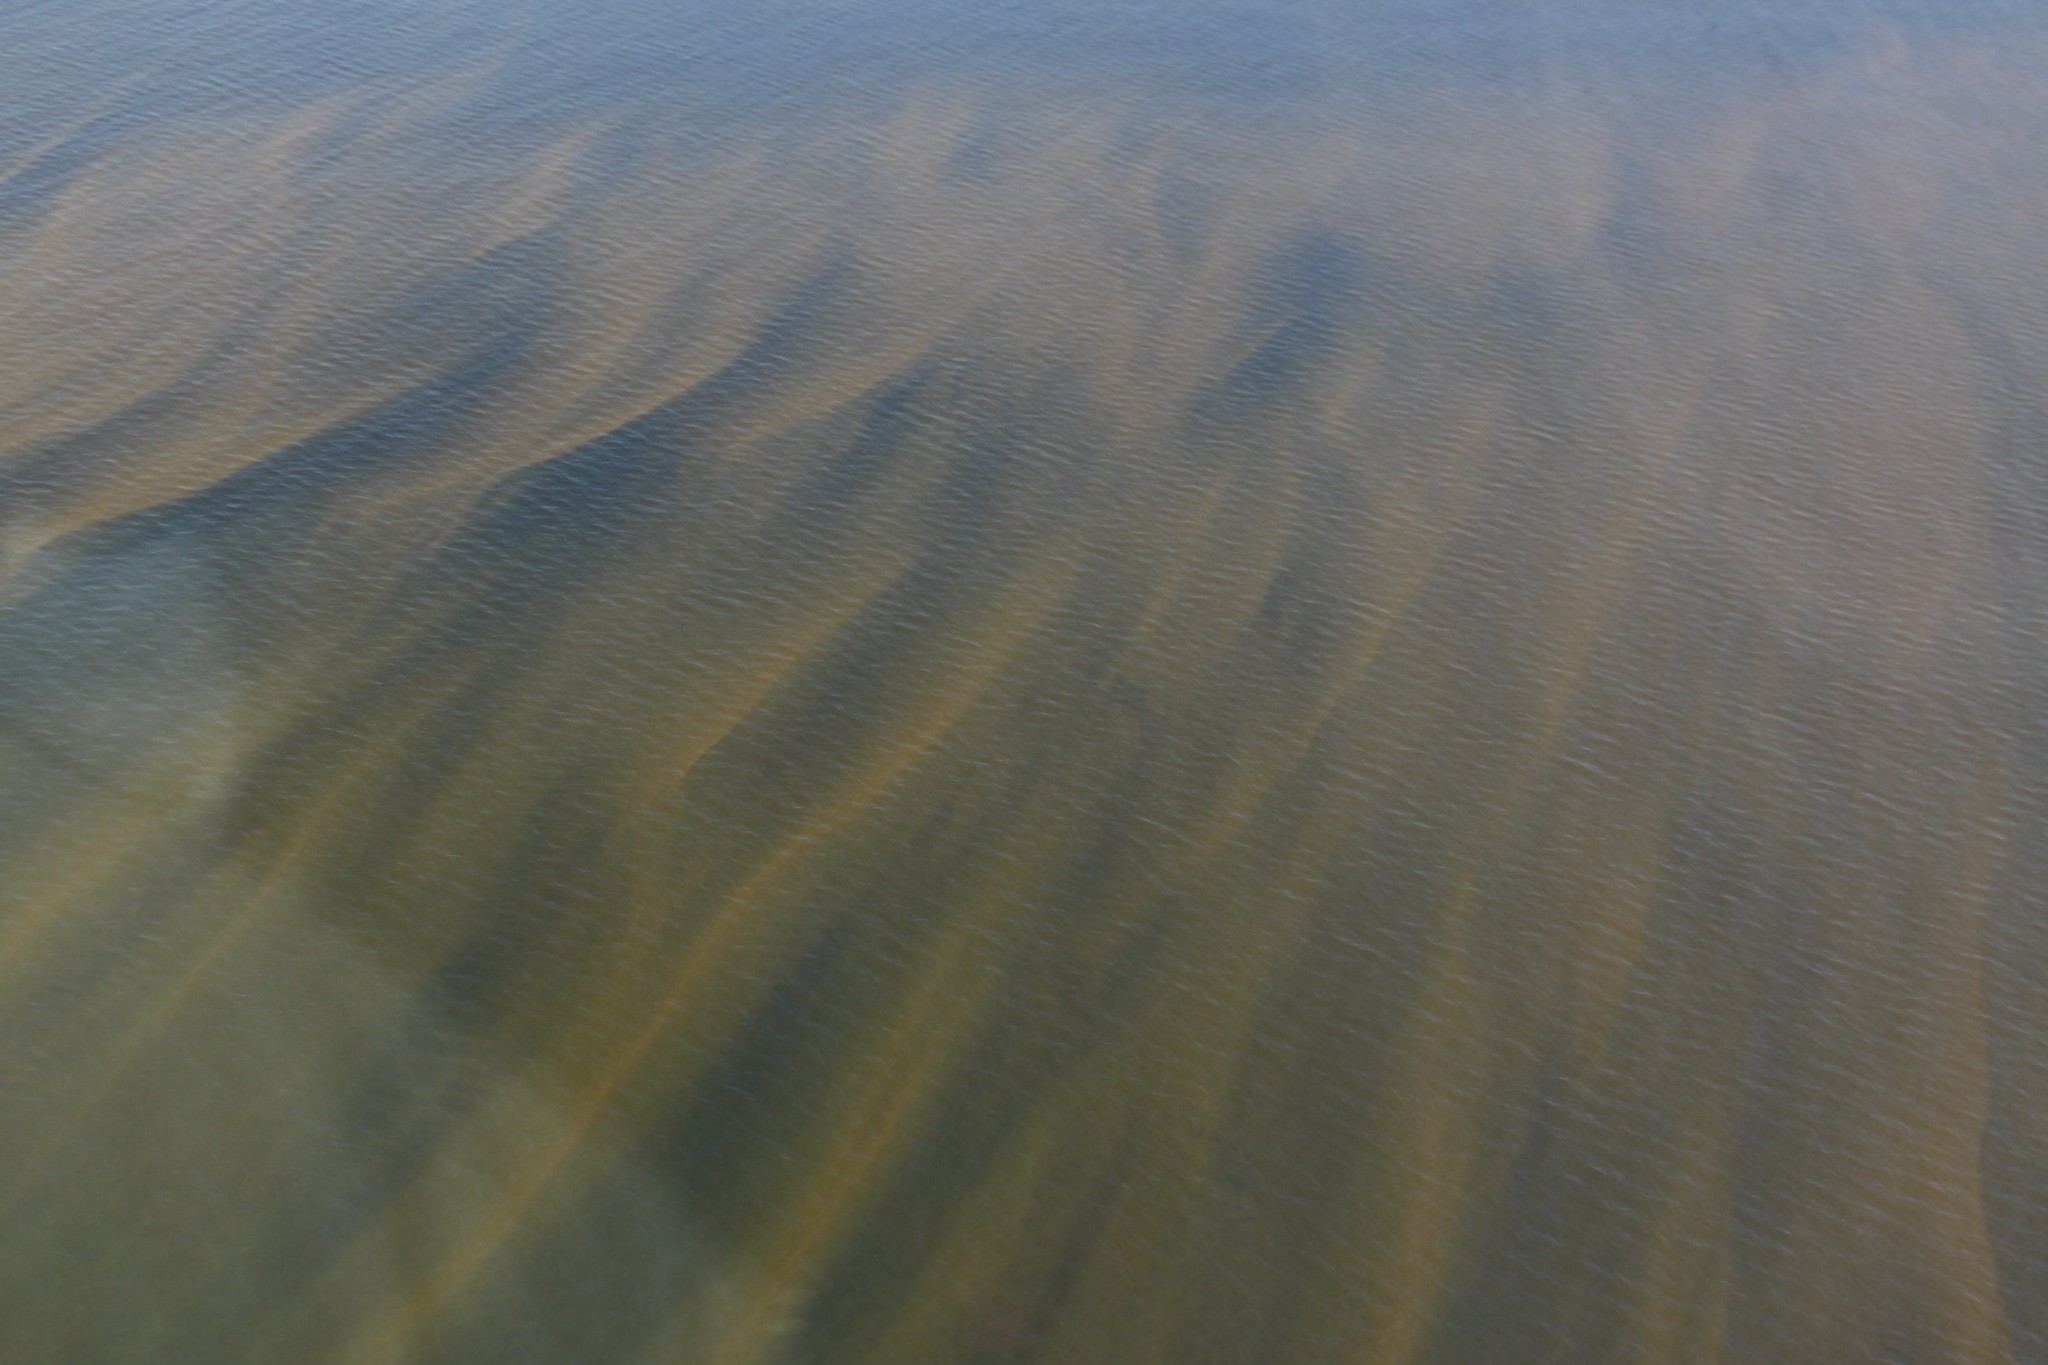 FWC Aerial survey for red tide shows streaks of discoloration.